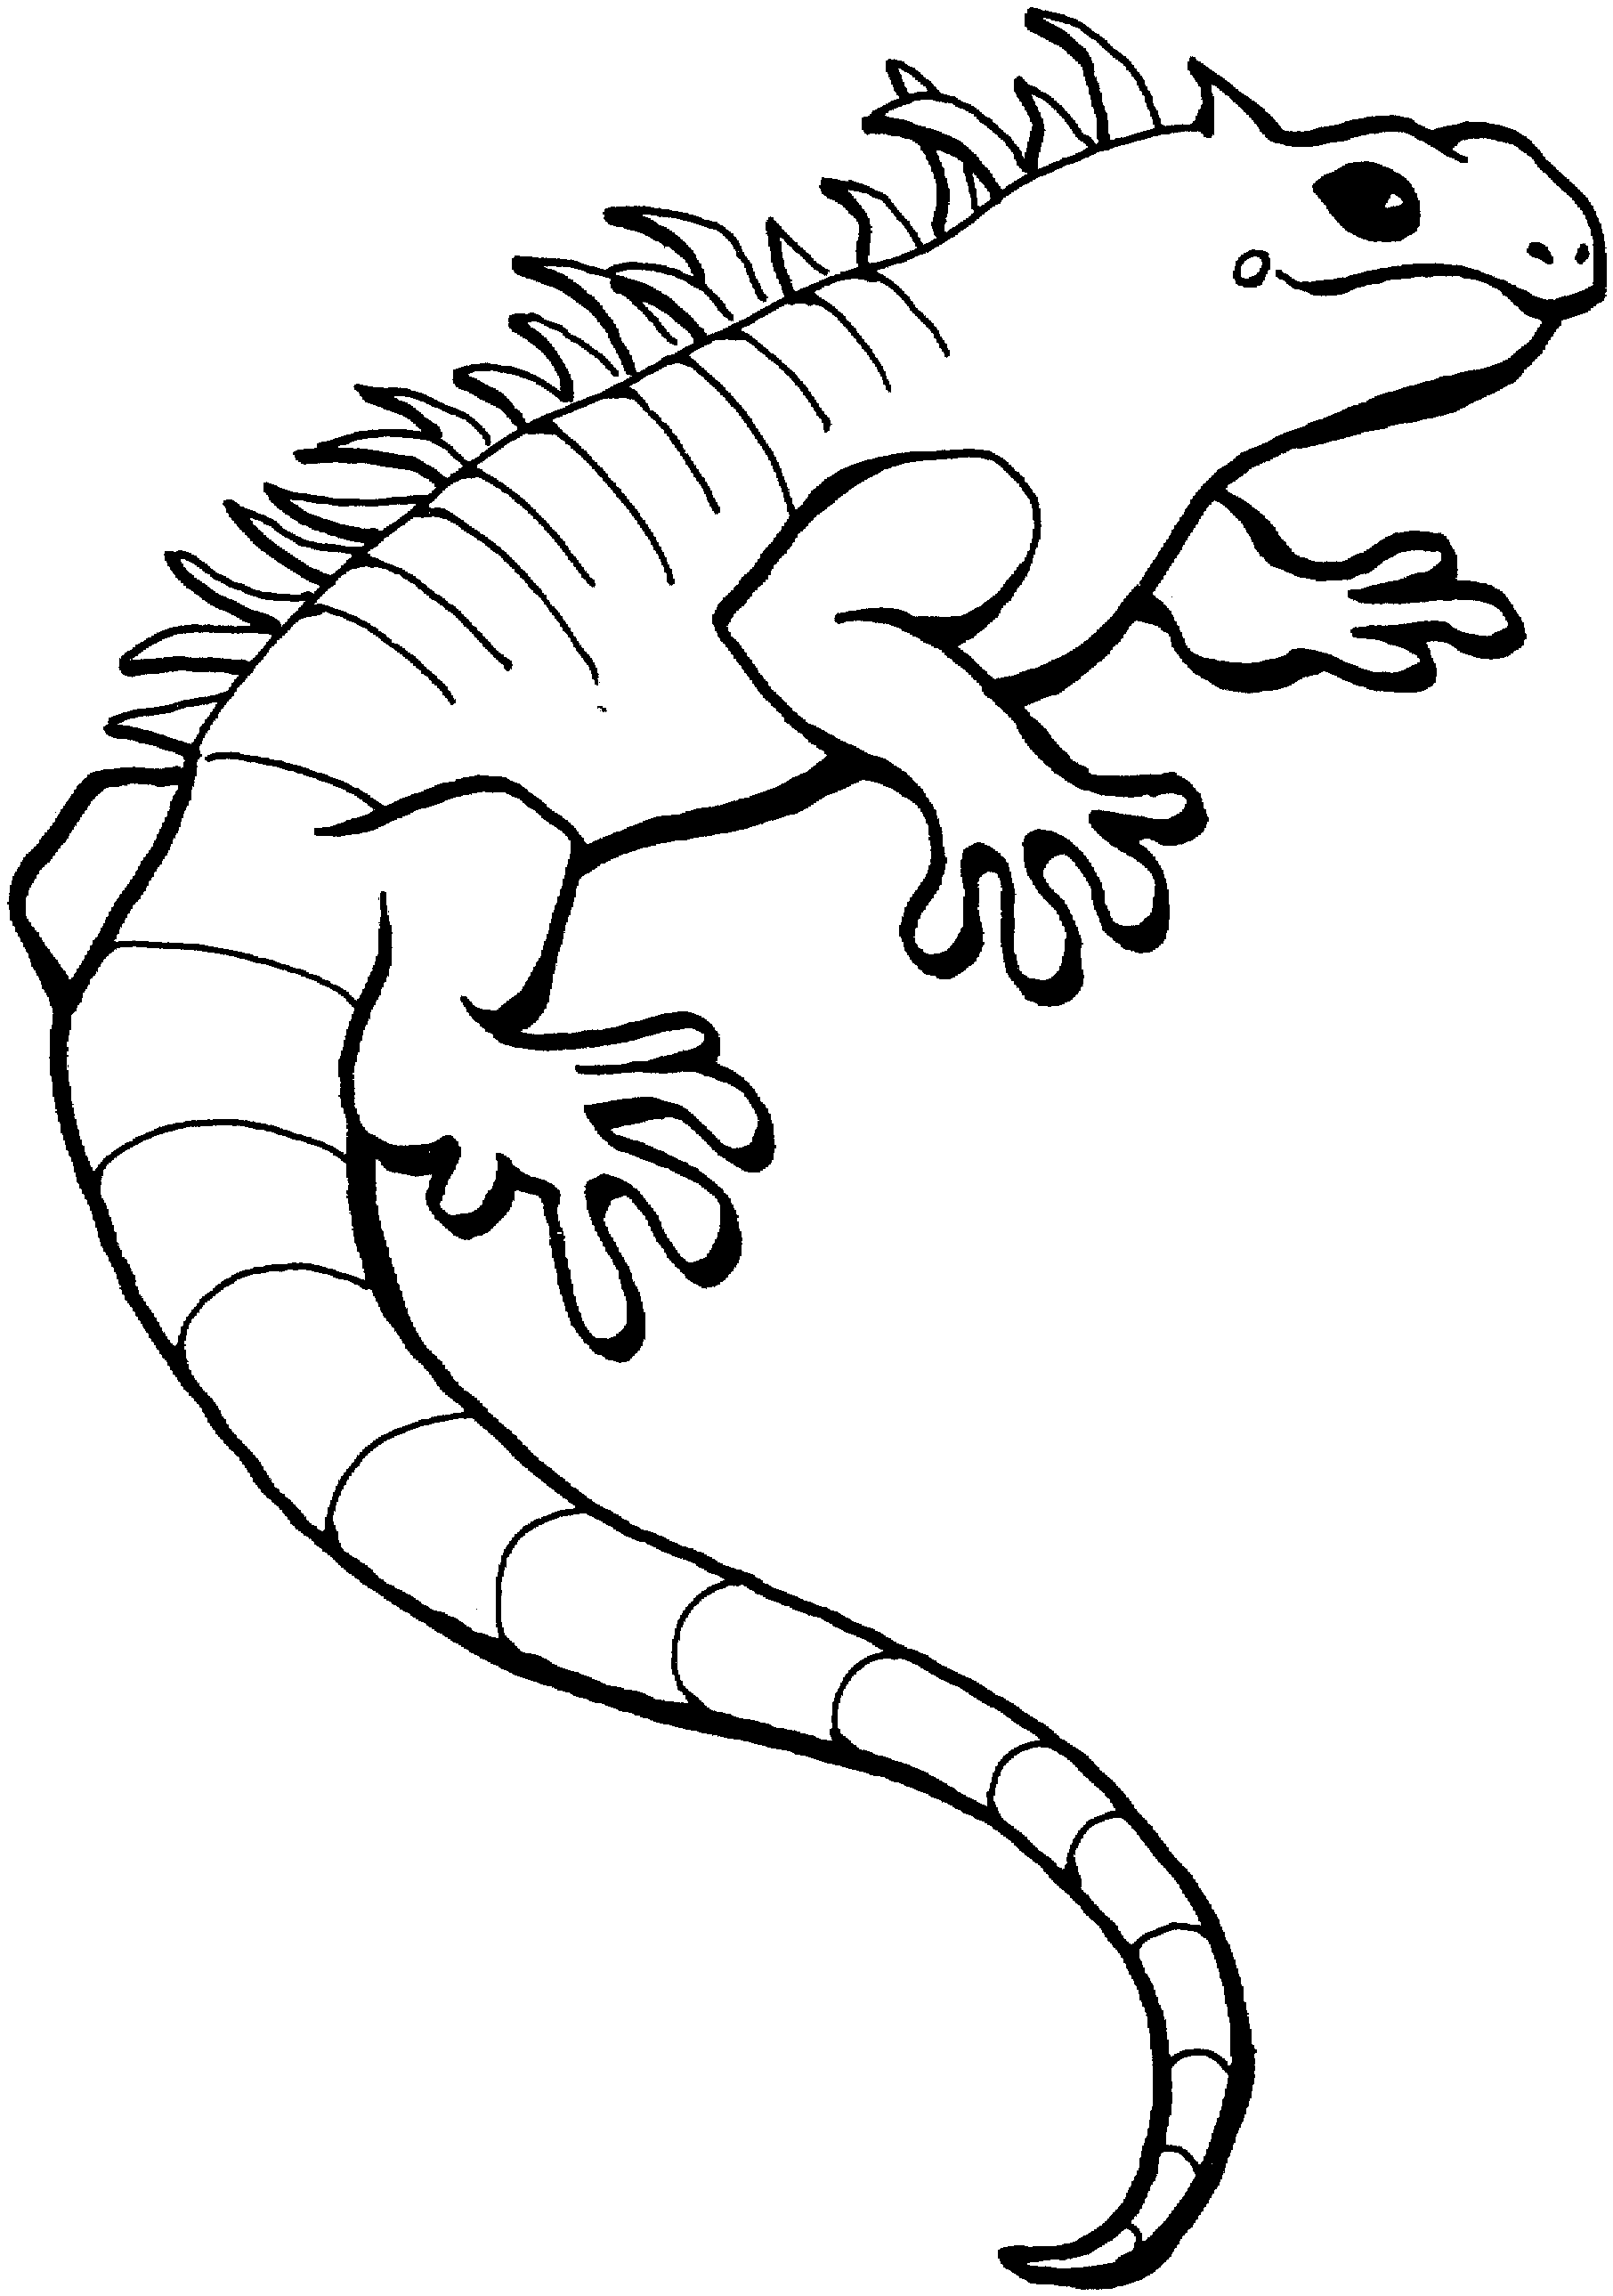 lizard-coloring-page-0034-q1